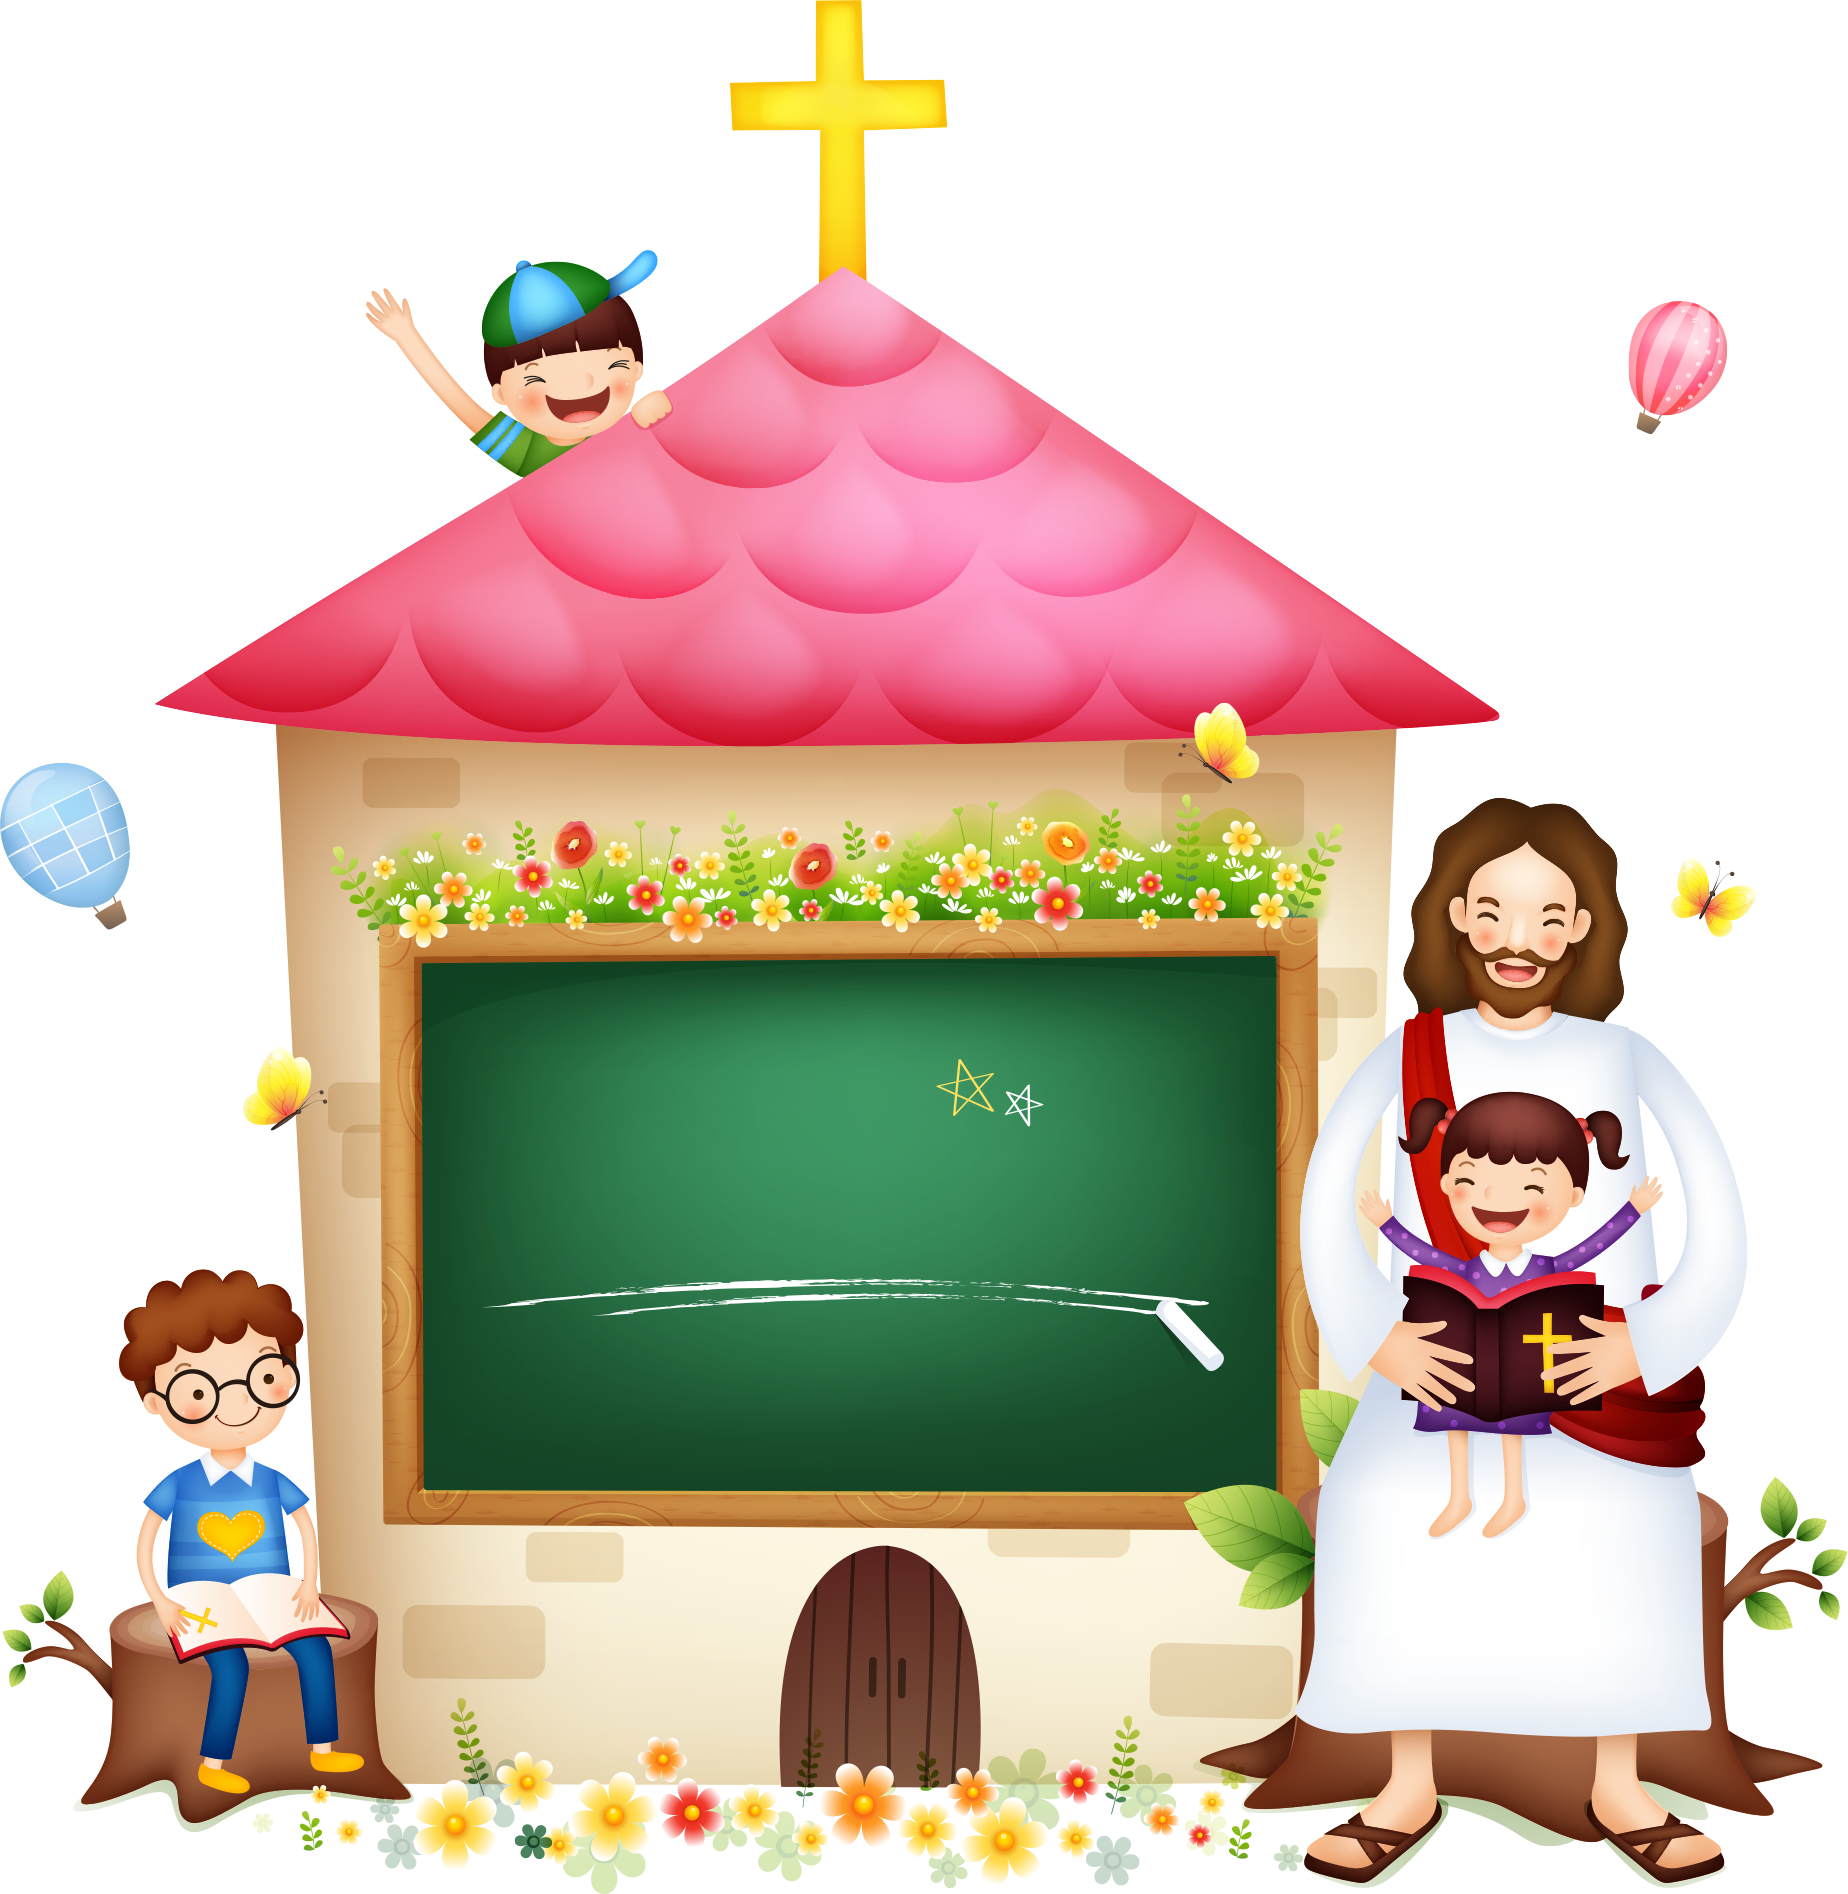 Bible Illustration Jesus Religion Christianity With Children PNG Image